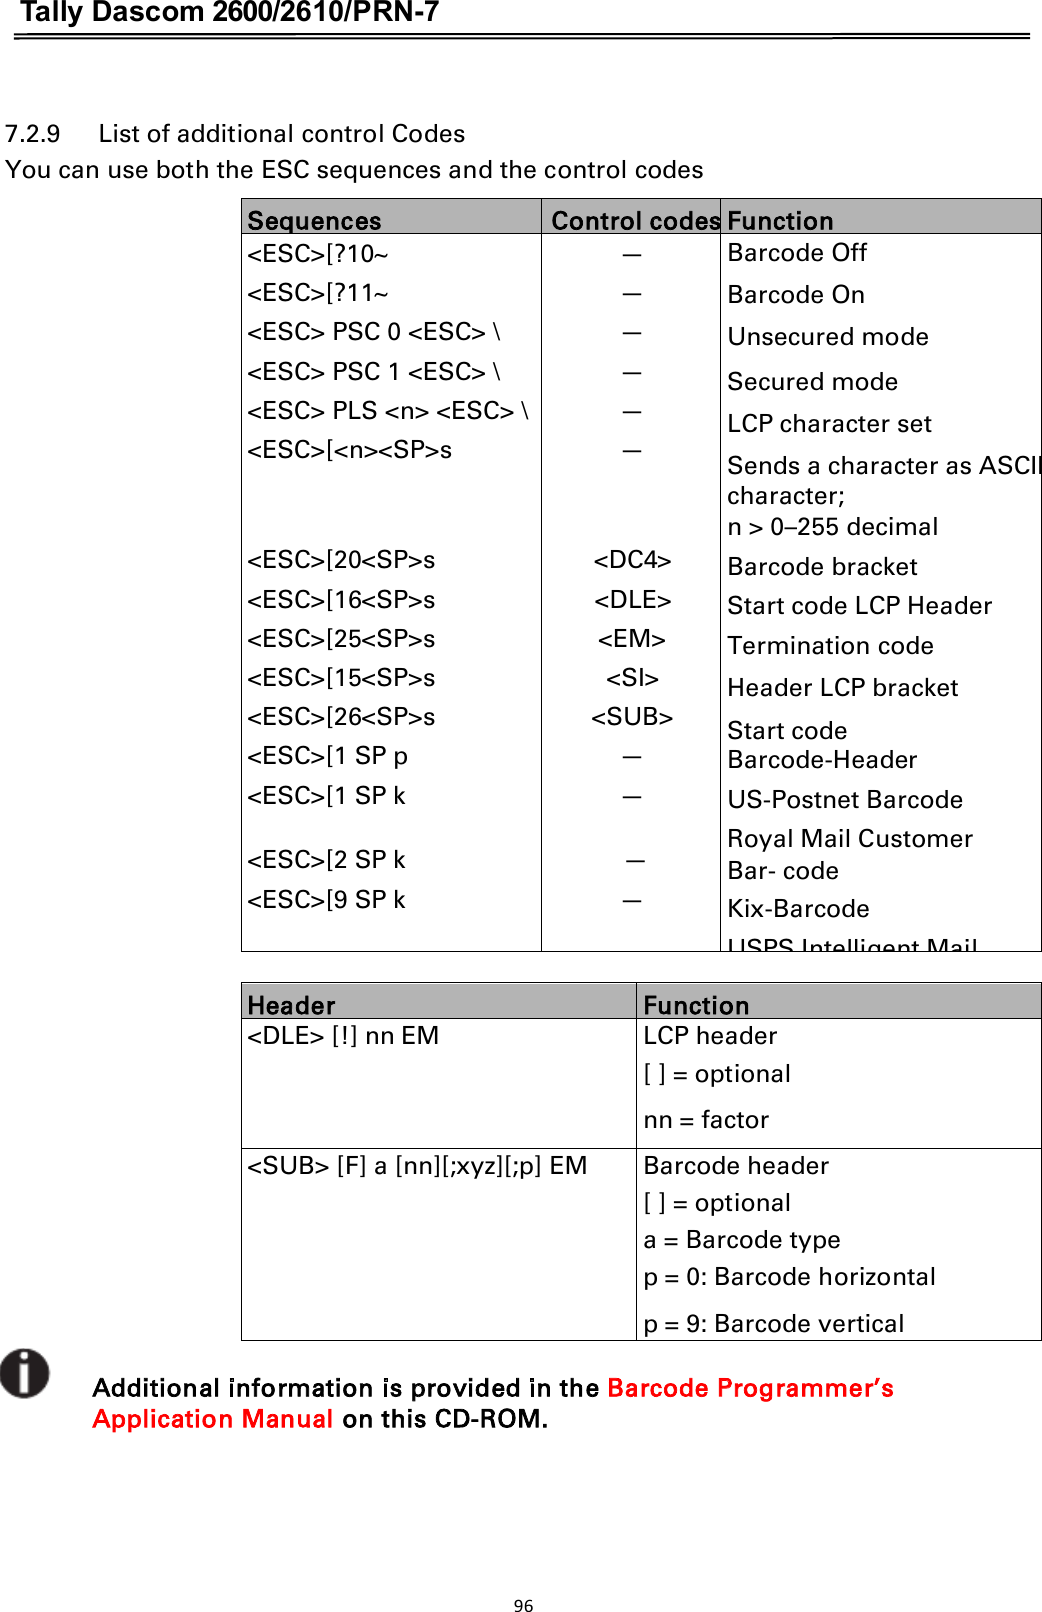 Tally Dascom 2600/2610/PRN-7 7.2.9      List of additional control Codes You can use both the ESC sequences and the control codes Sequences Control codesFunction&lt;ESC&gt;[?10~ &lt;ESC&gt;[?11~ &lt;ESC&gt; PSC 0 &lt;ESC&gt; \ &lt;ESC&gt; PSC 1 &lt;ESC&gt; \ &lt;ESC&gt; PLS &lt;n&gt; &lt;ESC&gt; \ &lt;ESC&gt;[&lt;n&gt;&lt;SP&gt;s     &lt;ESC&gt;[20&lt;SP&gt;s &lt;ESC&gt;[16&lt;SP&gt;s &lt;ESC&gt;[25&lt;SP&gt;s &lt;ESC&gt;[15&lt;SP&gt;s &lt;ESC&gt;[26&lt;SP&gt;s &lt;ESC&gt;[1 SP p &lt;ESC&gt;[1 SP k   &lt;ESC&gt;[2 SP k &lt;ESC&gt;[9 SP k — — — — — —     &lt;DC4&gt; &lt;DLE&gt; &lt;EM&gt; &lt;SI&gt; &lt;SUB&gt; — —   —— Barcode Off Barcode On Unsecured mode   Secured mode LCP character set Sends a character as ASCII character; n &gt; 0–255 decimalBarcode bracket Start code LCP Header Termination code Header LCP bracket Start code Barcode-Header US-Postnet Barcode Royal Mail Customer Bar- code Kix-Barcode USPS Intelligent Mail  Header Function &lt;DLE&gt; [!] nn EM  LCP header [ ] = optional   nn = factor &lt;SUB&gt; [F] a [nn][;xyz][;p] EM  Barcode header [ ] = optional a = Barcode type p = 0: Barcode horizontal   p = 9: Barcode vertical Additional information is provided in the Barcode Programmer’s Application Manual on this CD-ROM.    96  